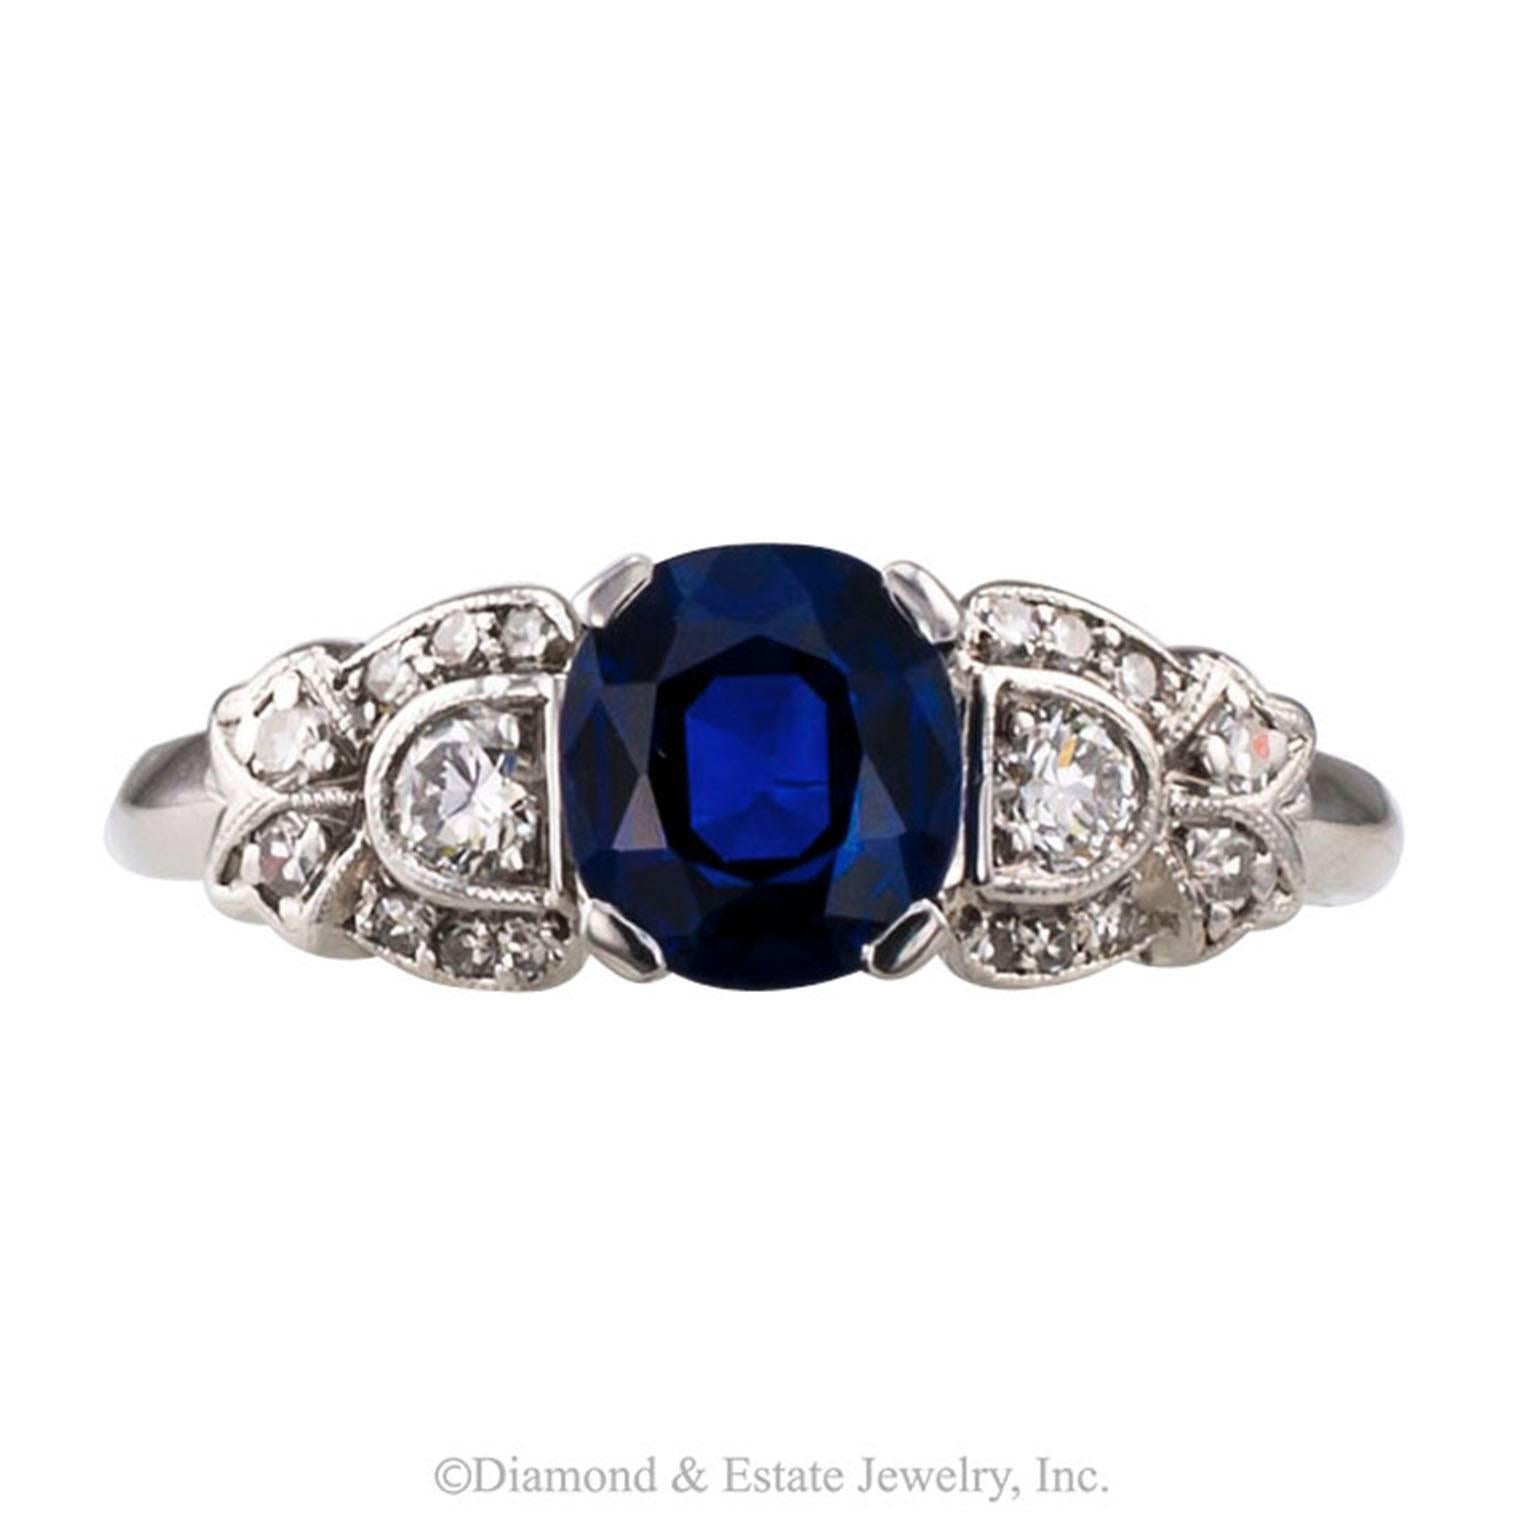 Art Deco Sapphire Diamond Platinum Ring

1930s sapphire and diamond solitaire ring mounted in platinum.  The design centers upon a very pretty cushion-shaped blue sapphire weighing 1.23 carats, between geometric shoulders set with diamonds